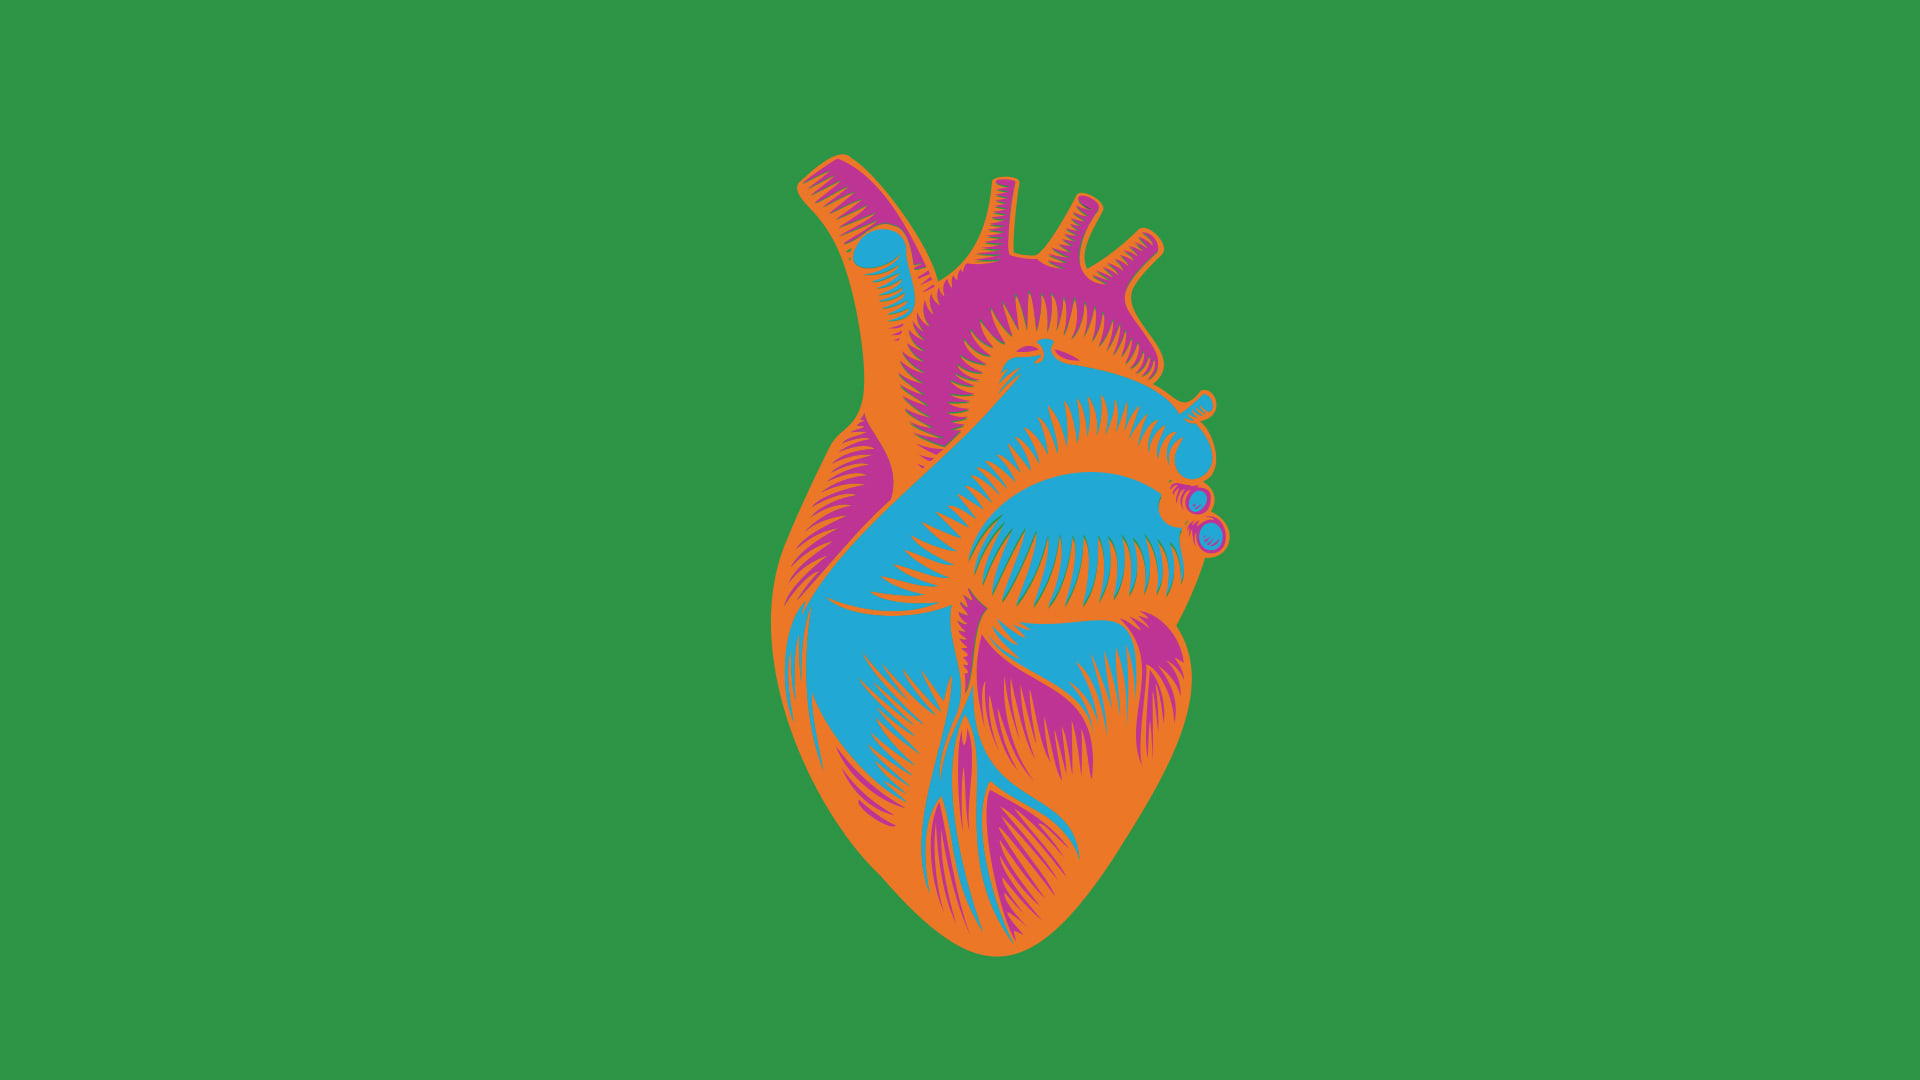 Anatomical illustration of a pink and orange heart on a green background.